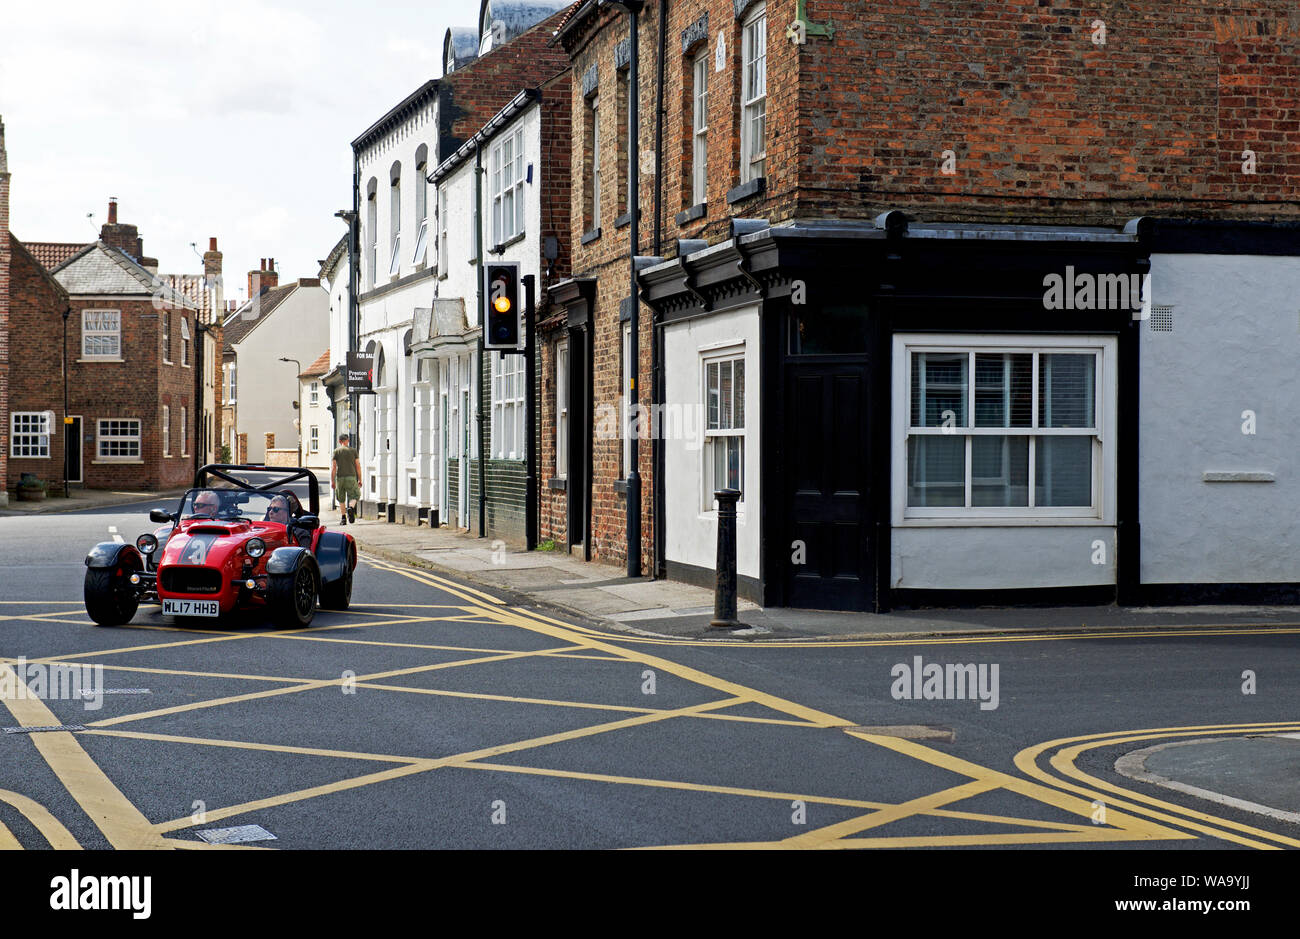 Caterham Super 7 sports car and yellow box junction in the village of Cawood, North Yorkshire, England UK Stock Photo